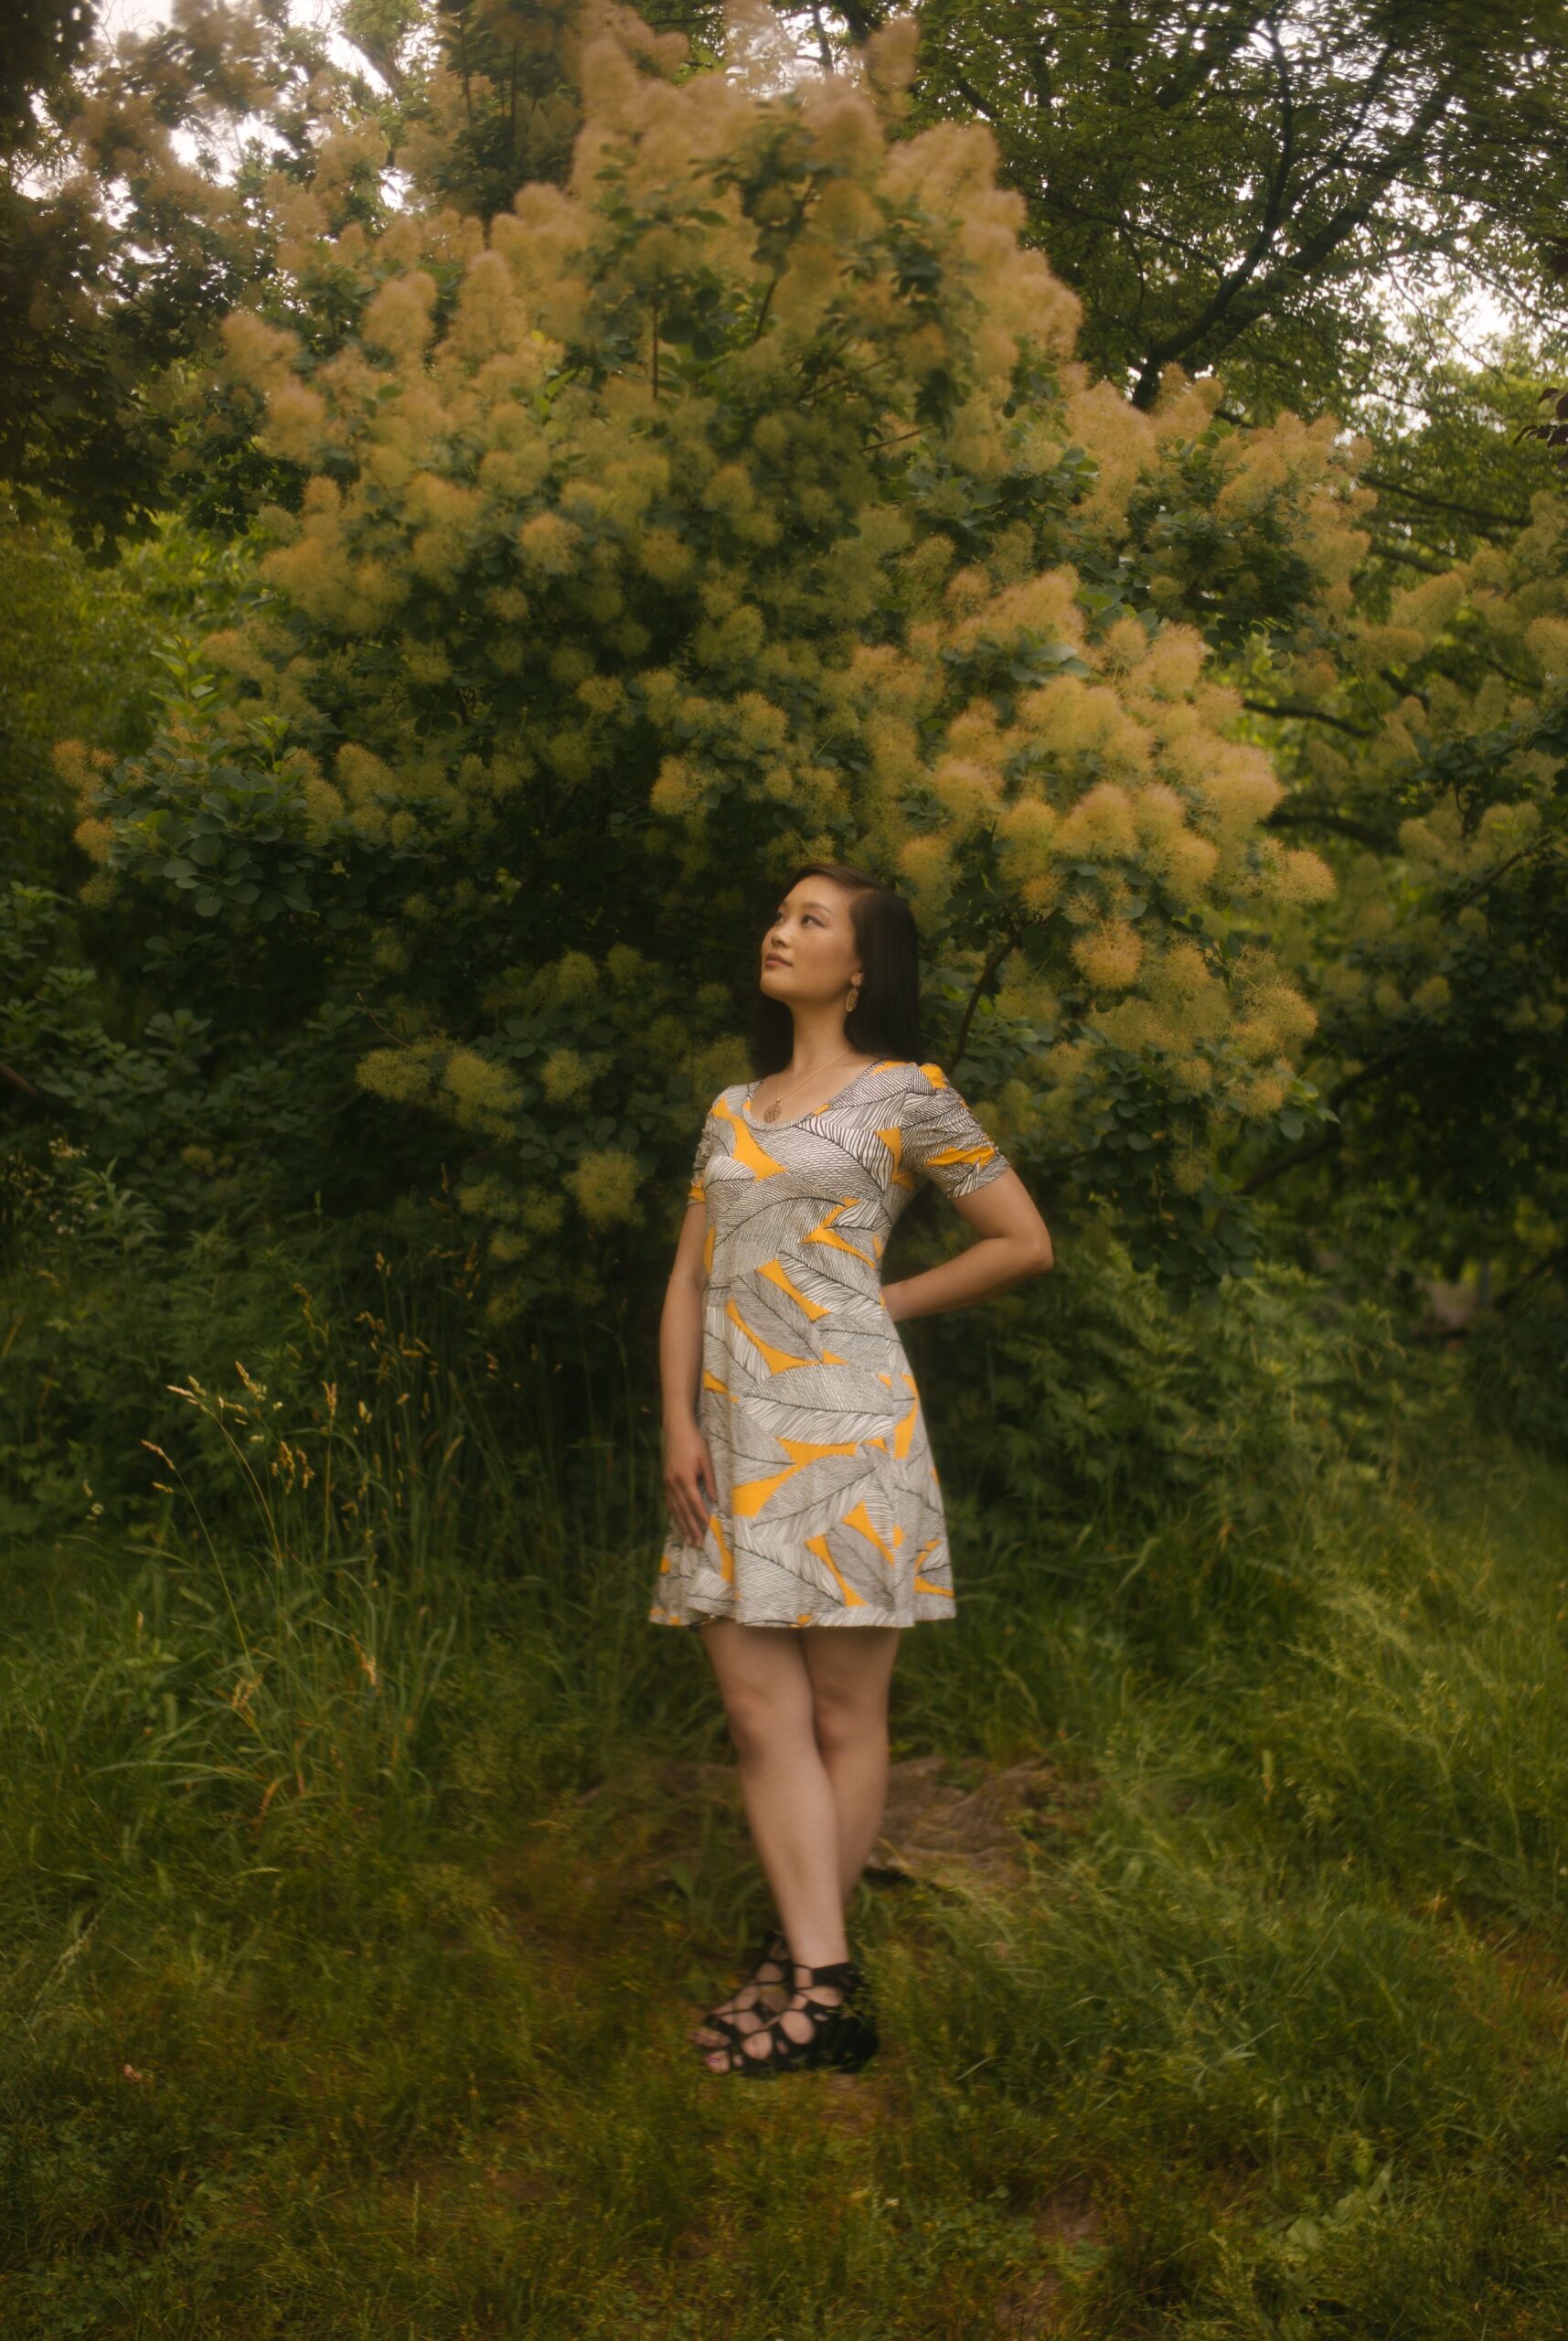 Jessica Hwang standing amidst a forest of trees with vibrant yellow flowers, her gaze fixed on the distant horizon